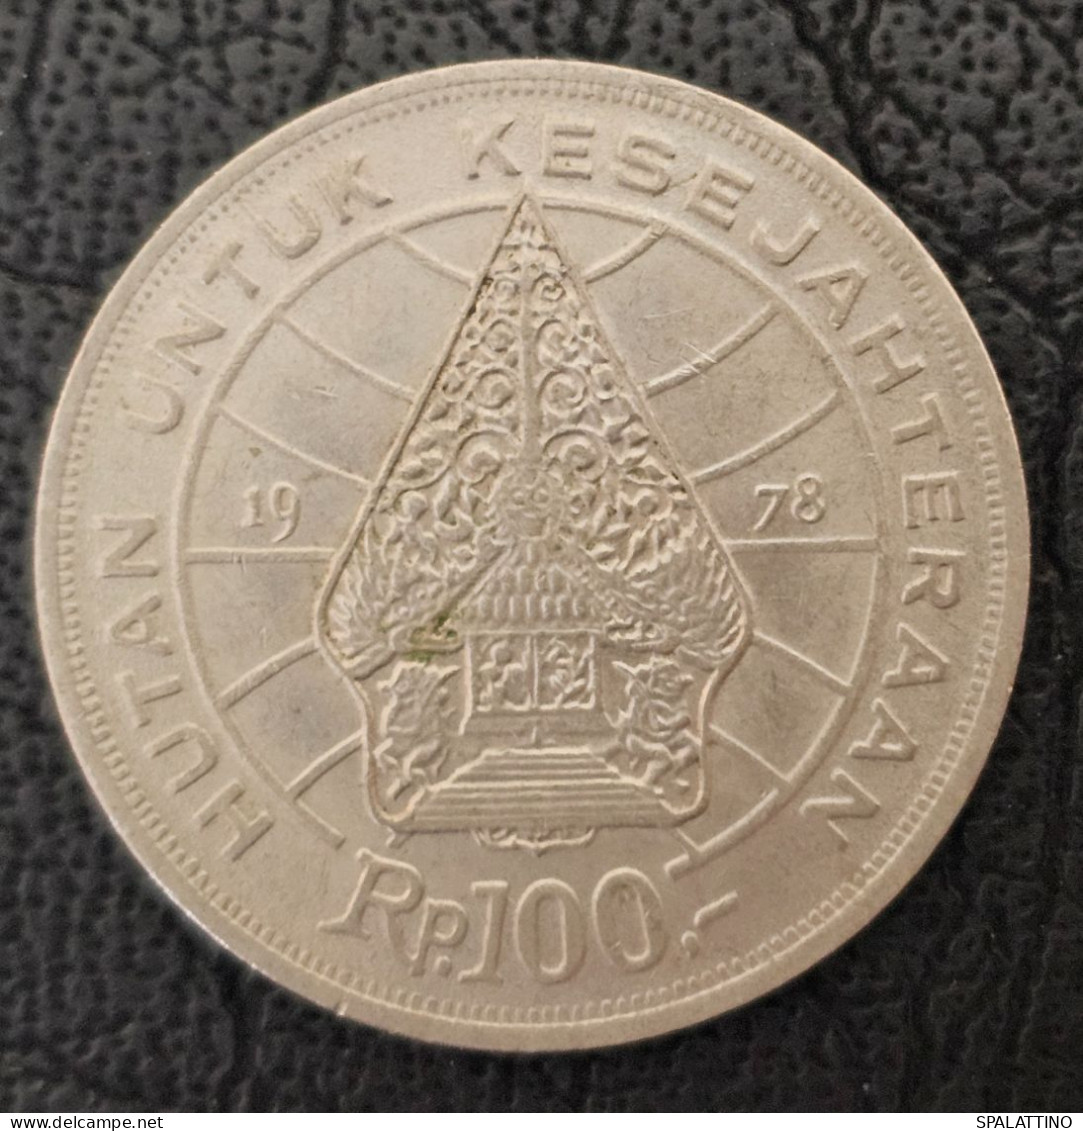 INDONESIA- 100 RUPIAH 1978. FORESTRY FOR PROSPERITY - Indonesia